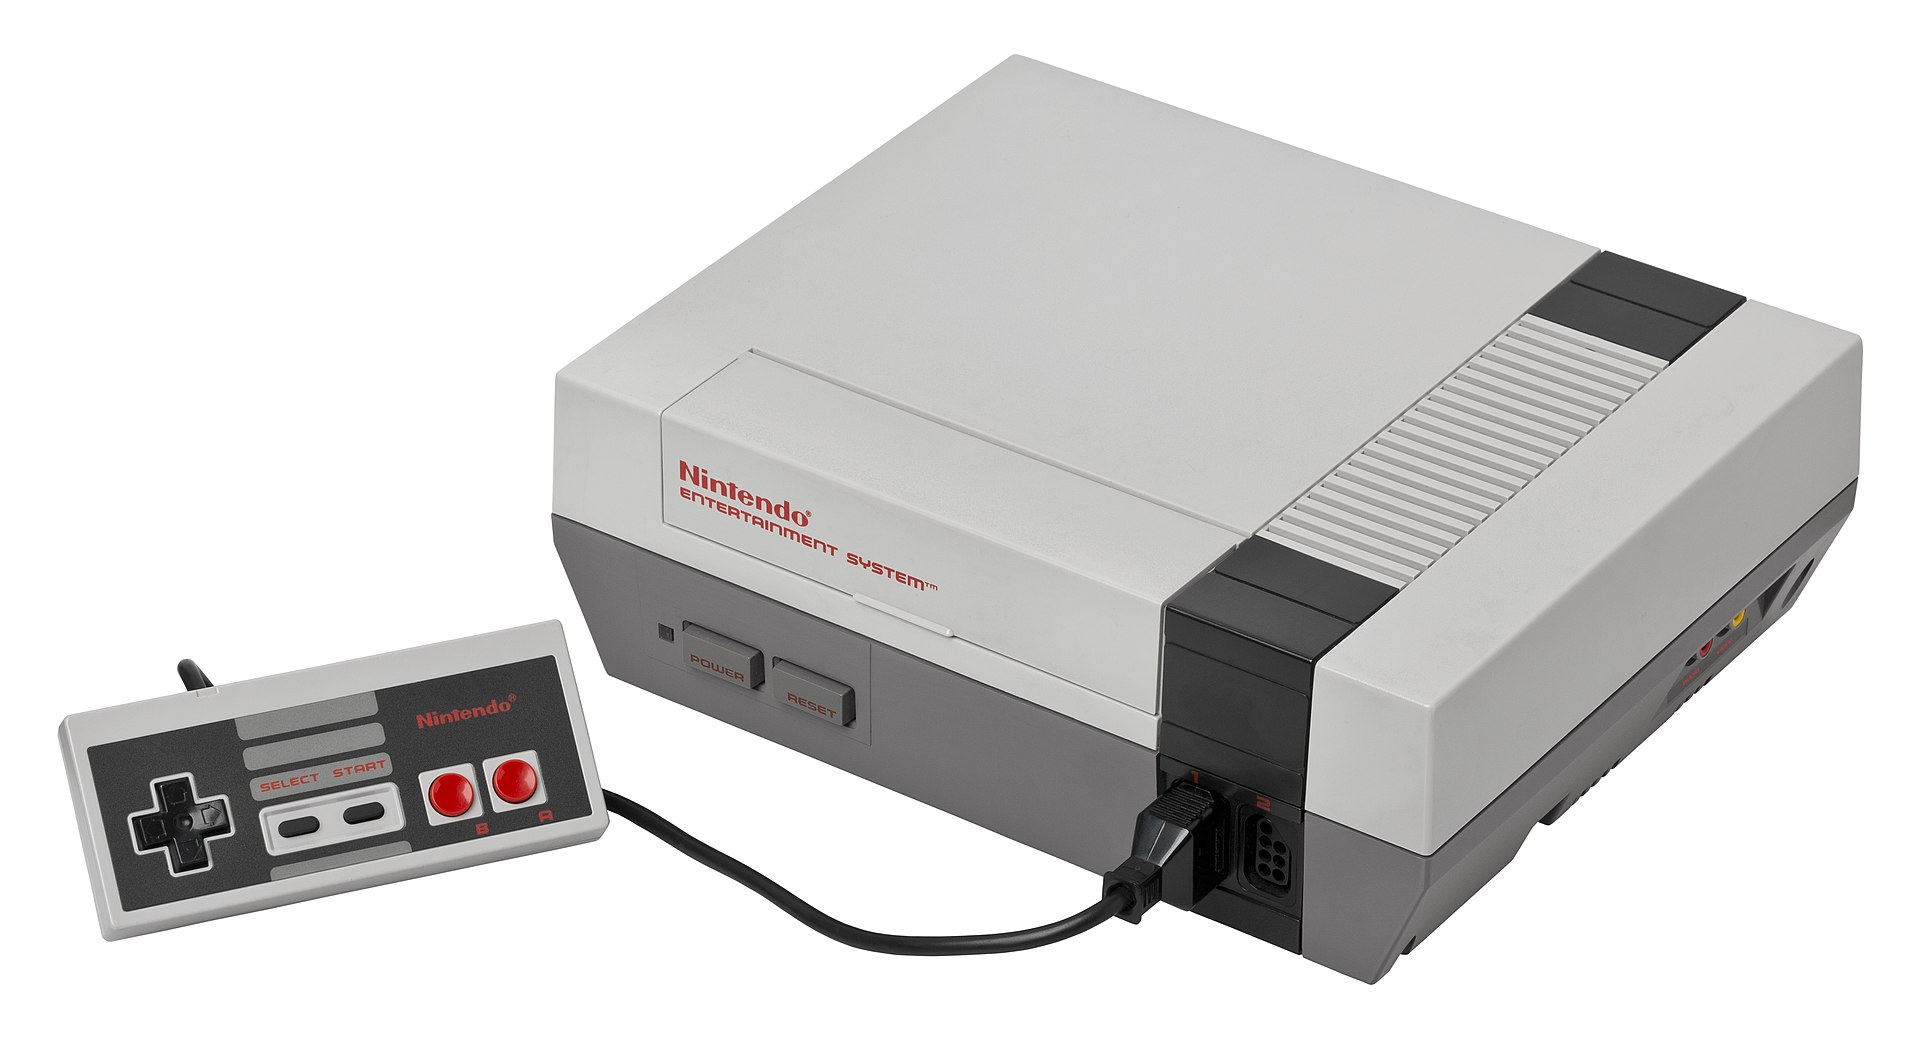 Every Nintendo Console Ranked From Worst to Best | of Geek